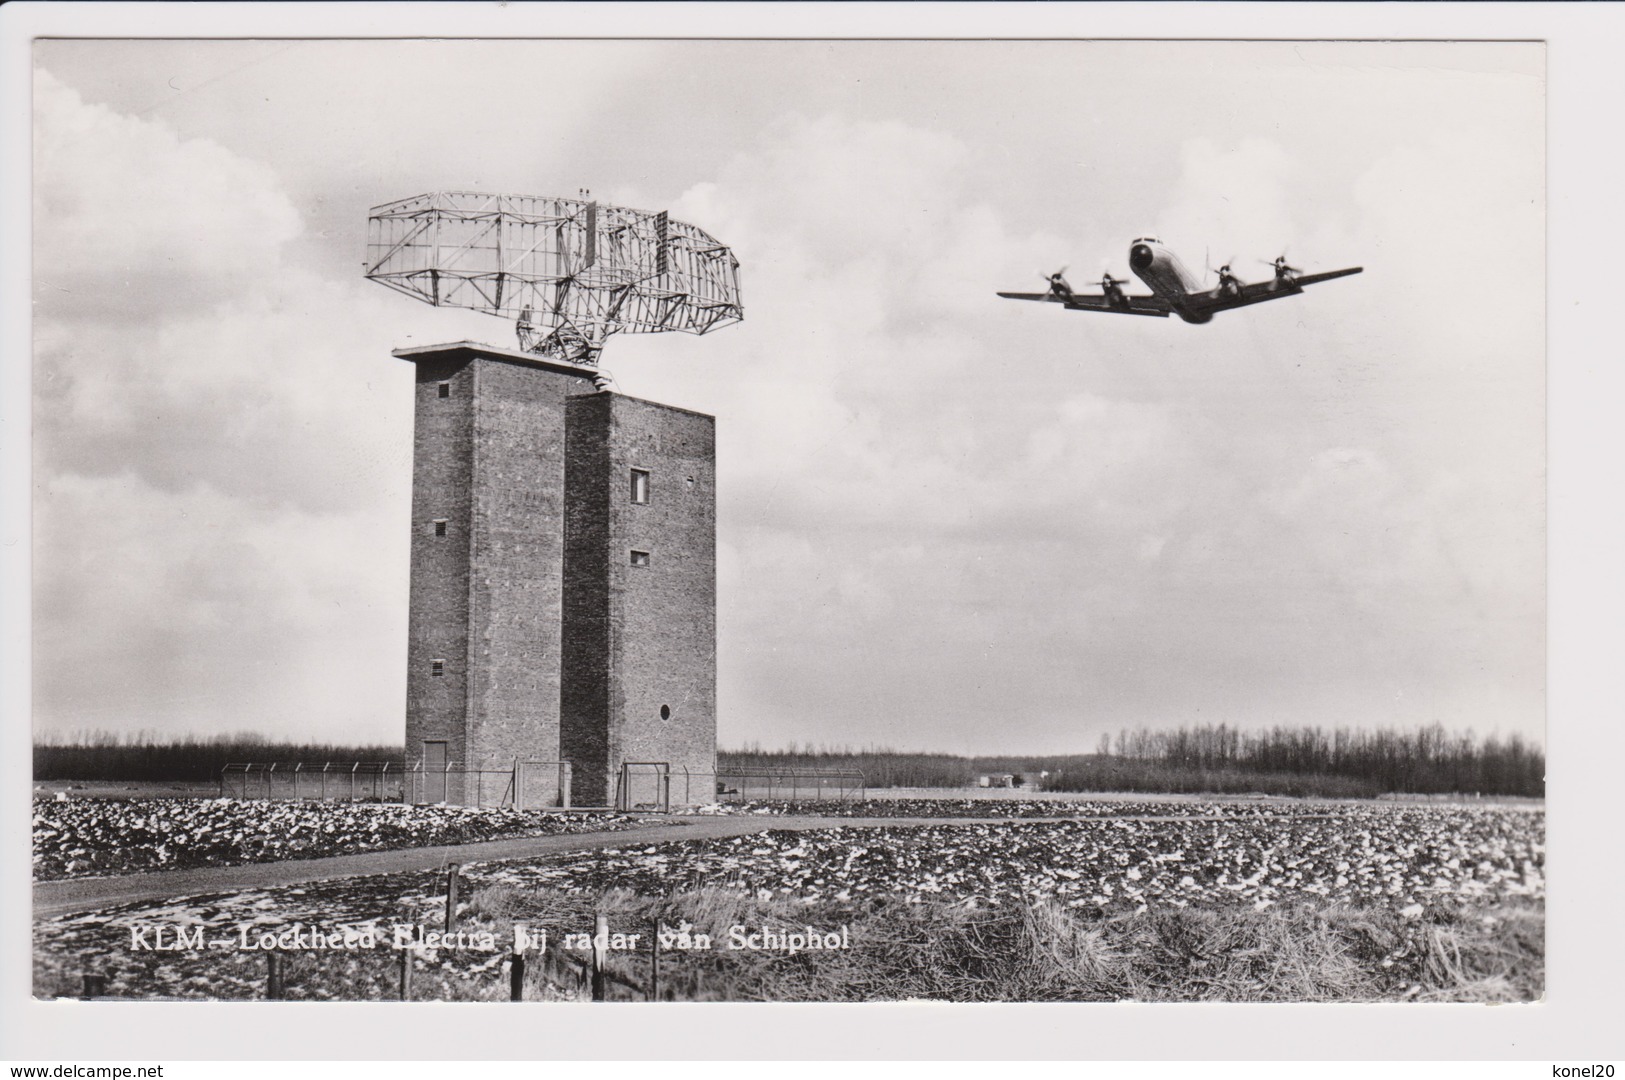 Vintage Rppc KLM K.L.M Royal Dutch Airlines Lockheed Electra L-188 Aircraft @ Schiphol Airport - 1919-1938: Between Wars